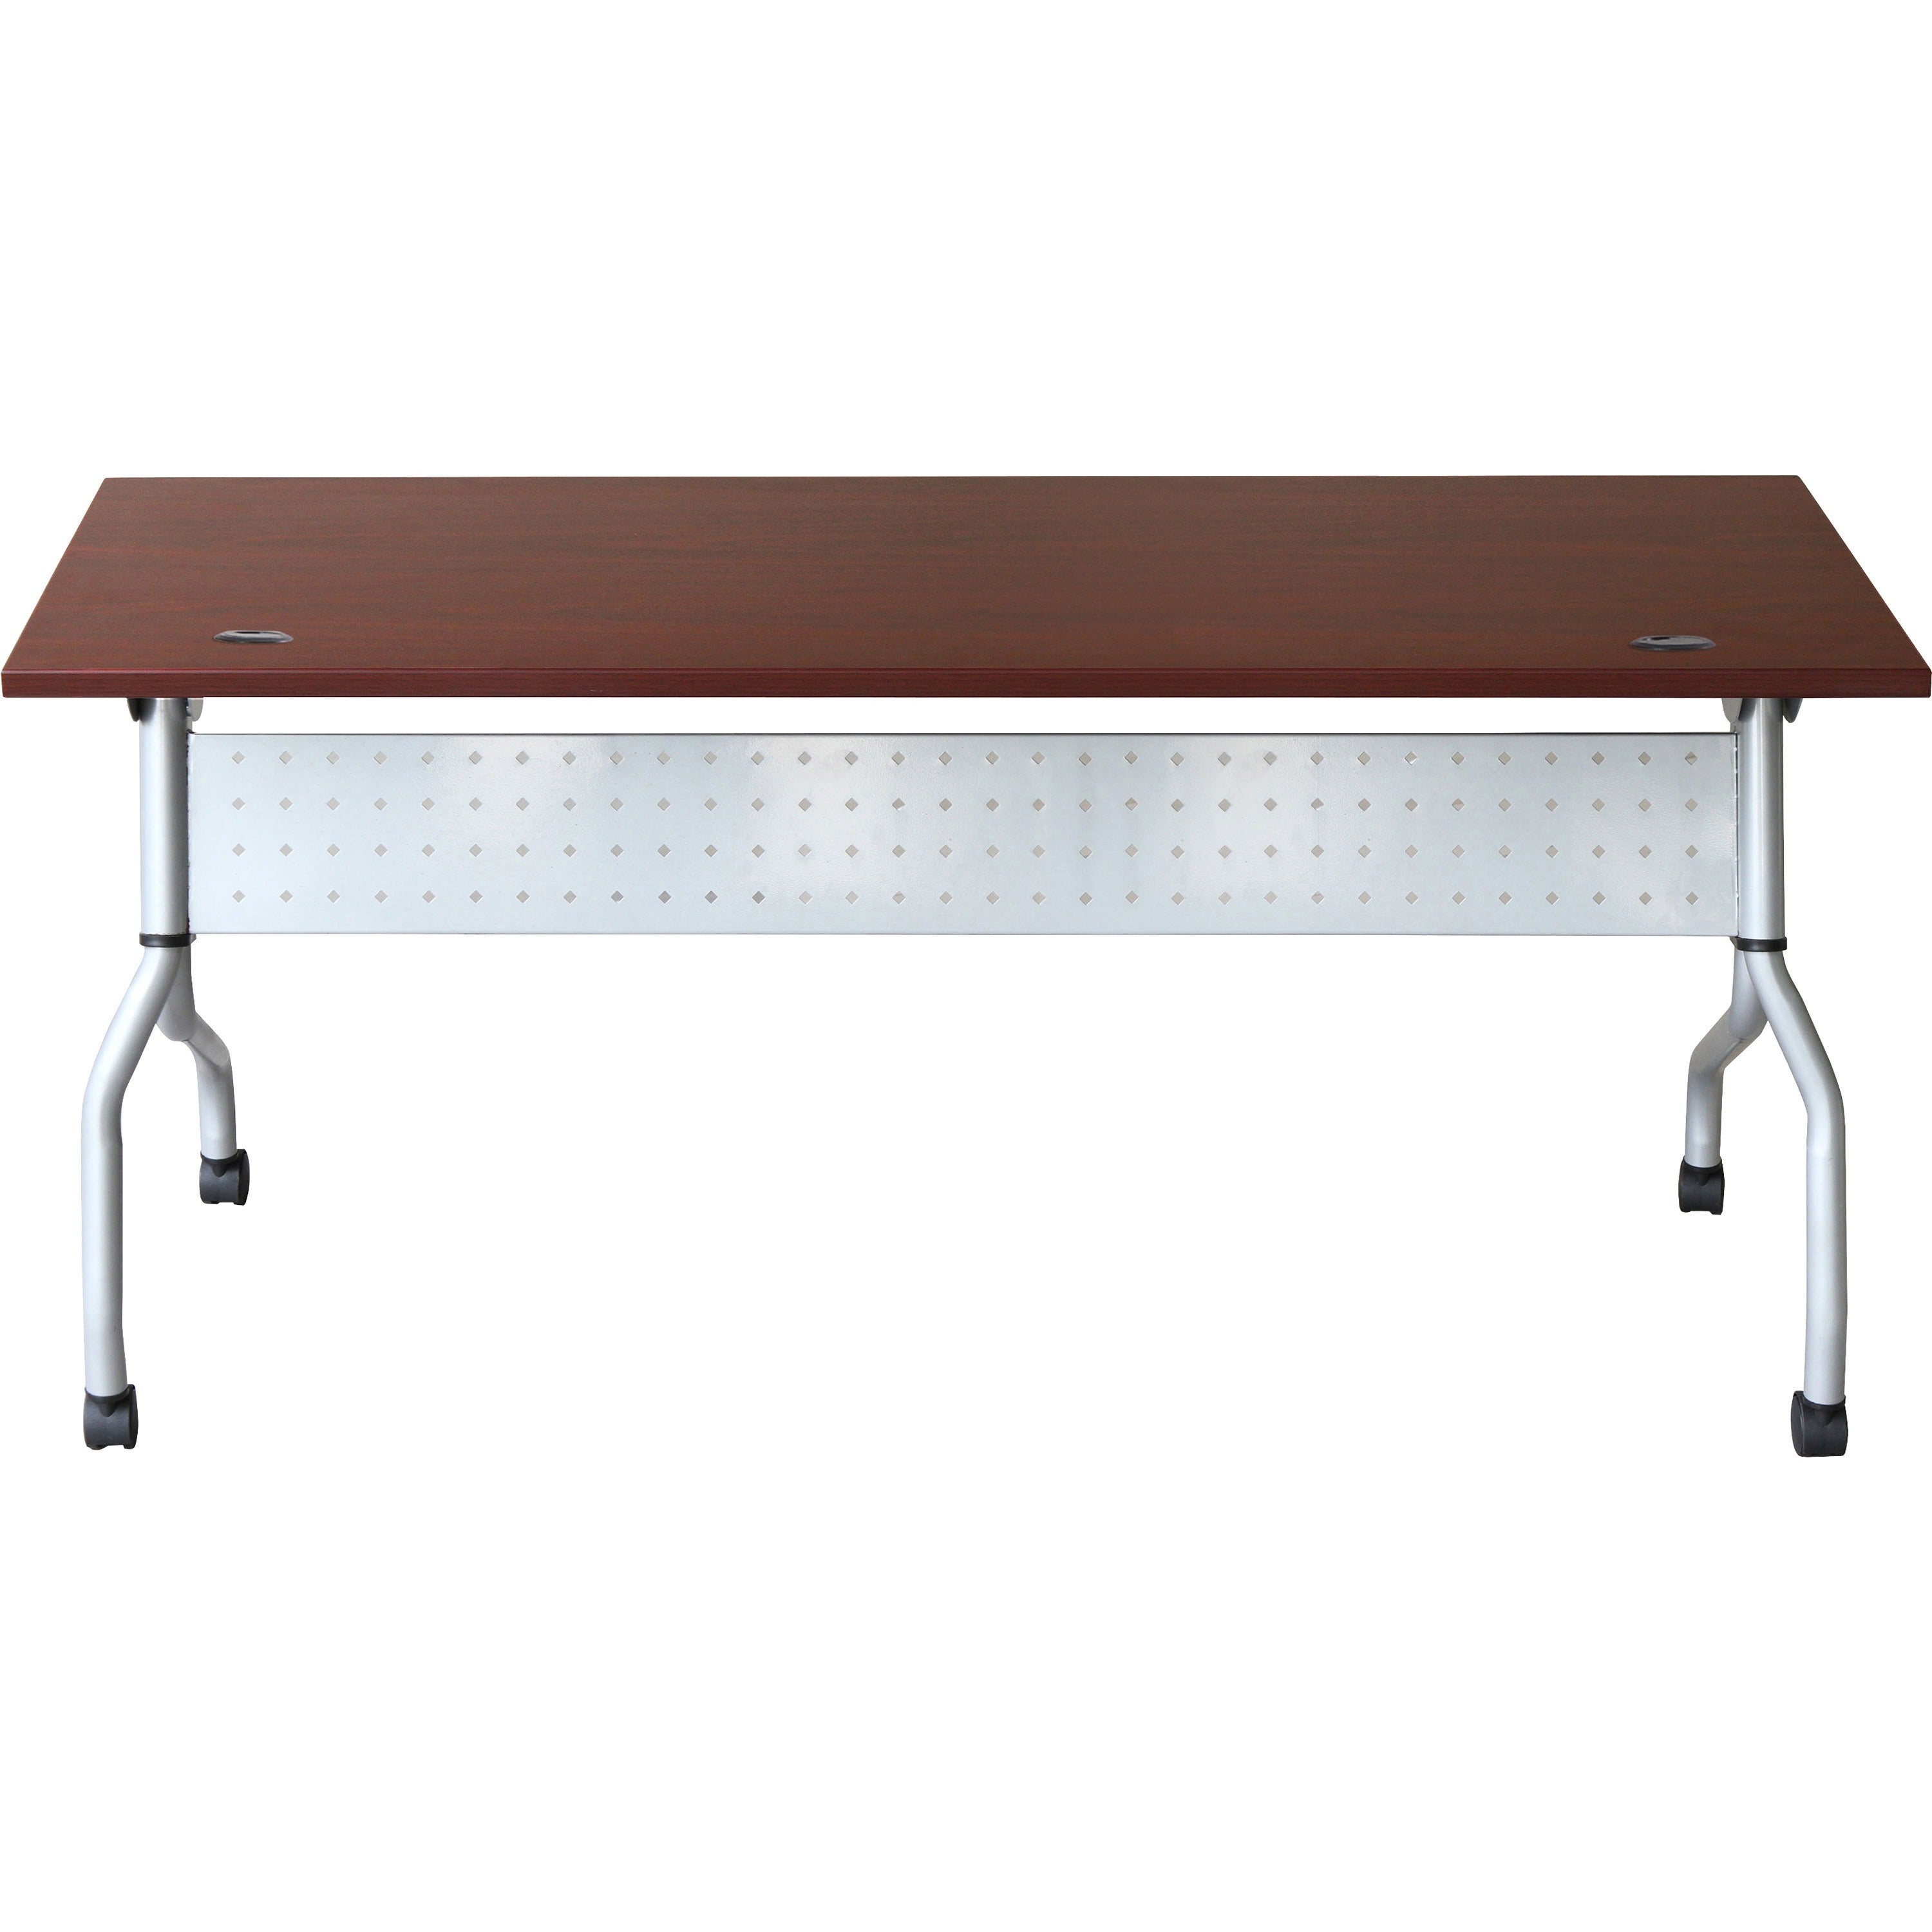 Lorell Flip Top Training Table - For - Table TopRectangle Top - Four Leg Base - 4 Legs x 23.60" Table Top Width x 72" Table Top Depth - 29.50" Height x 70.88" Width x 23.63" Depth - Assembly Required - Mahogany - Nylon - 1 Each - 